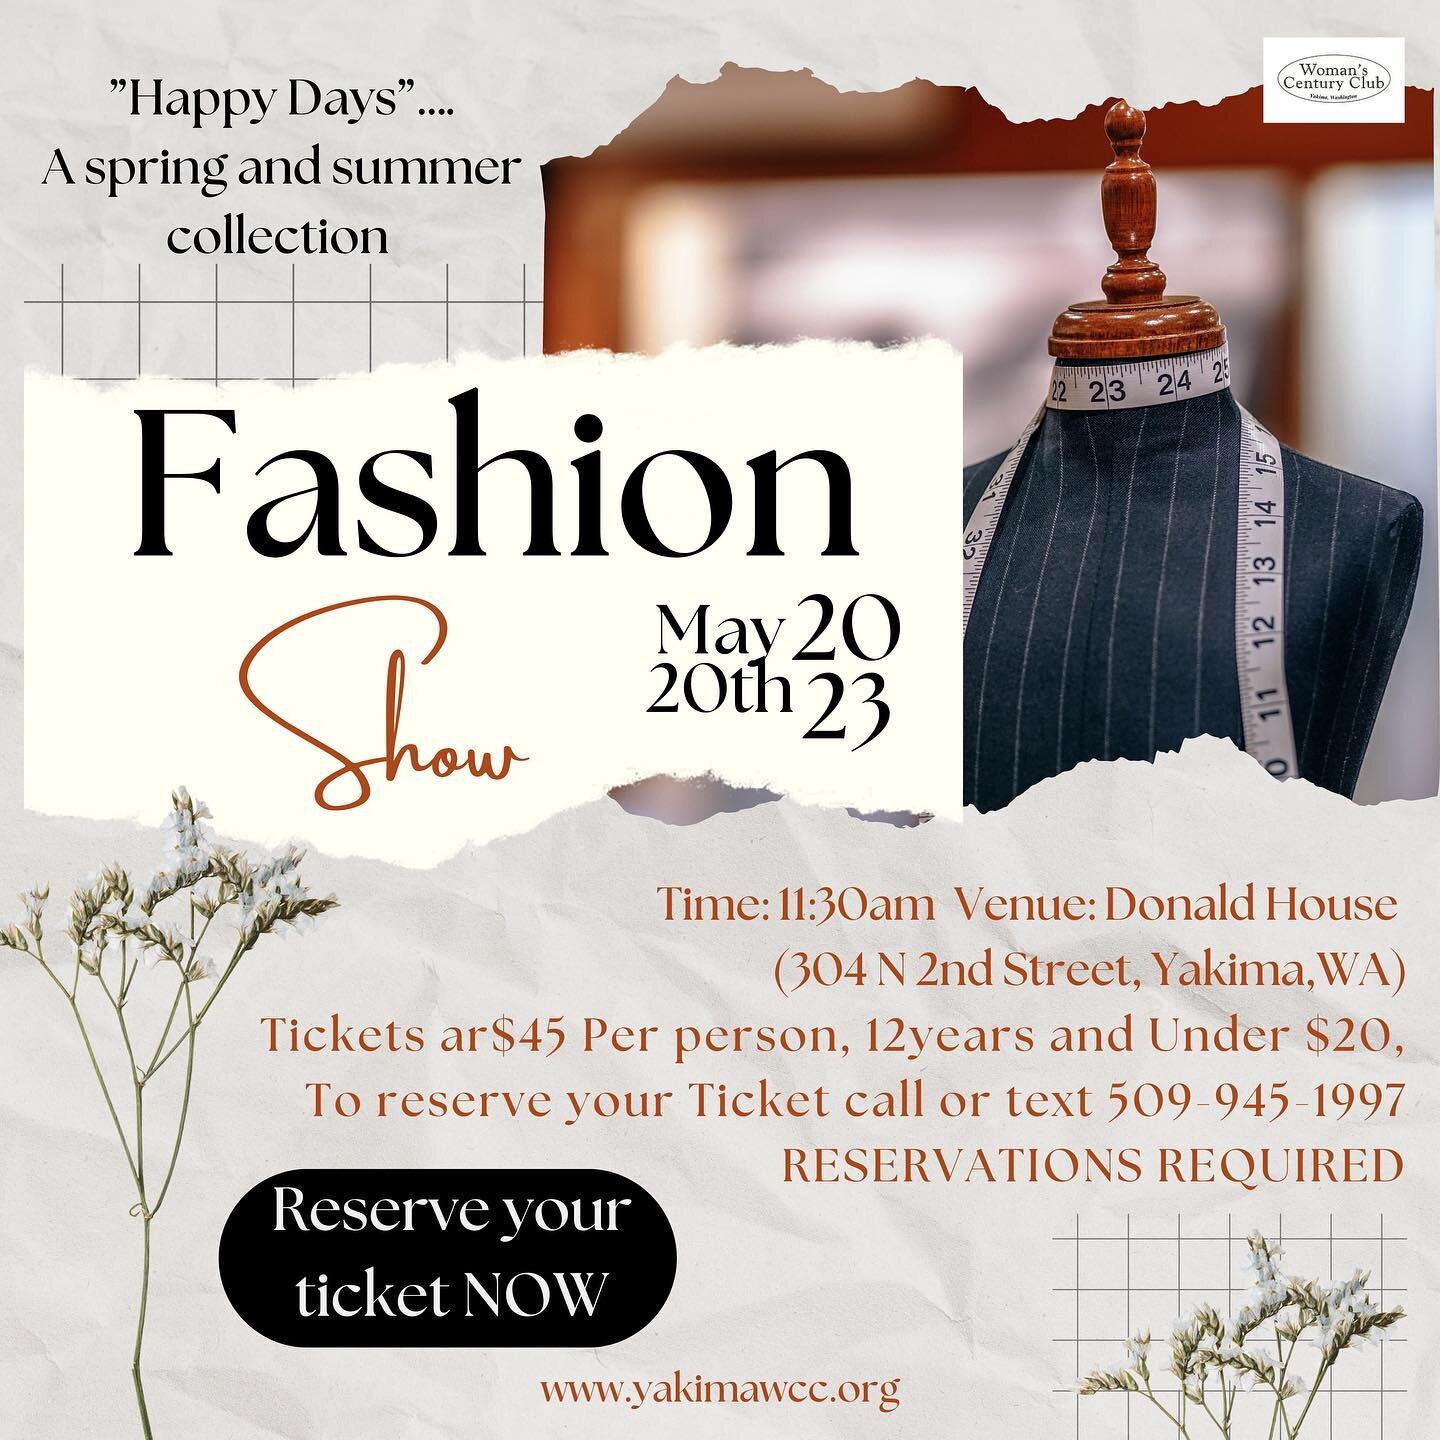 Ladies of Yakima✨

Presenting to you this years latest Spring and summer fashion &ldquo;HAPPY DAYS&rdquo; 
Hosted by the Women&rsquo;s century club 
On Saturday May 20th @11:30am 
Venue: Donald House (304 N 2nd Street, Yakima, WA) 
It is going to be 